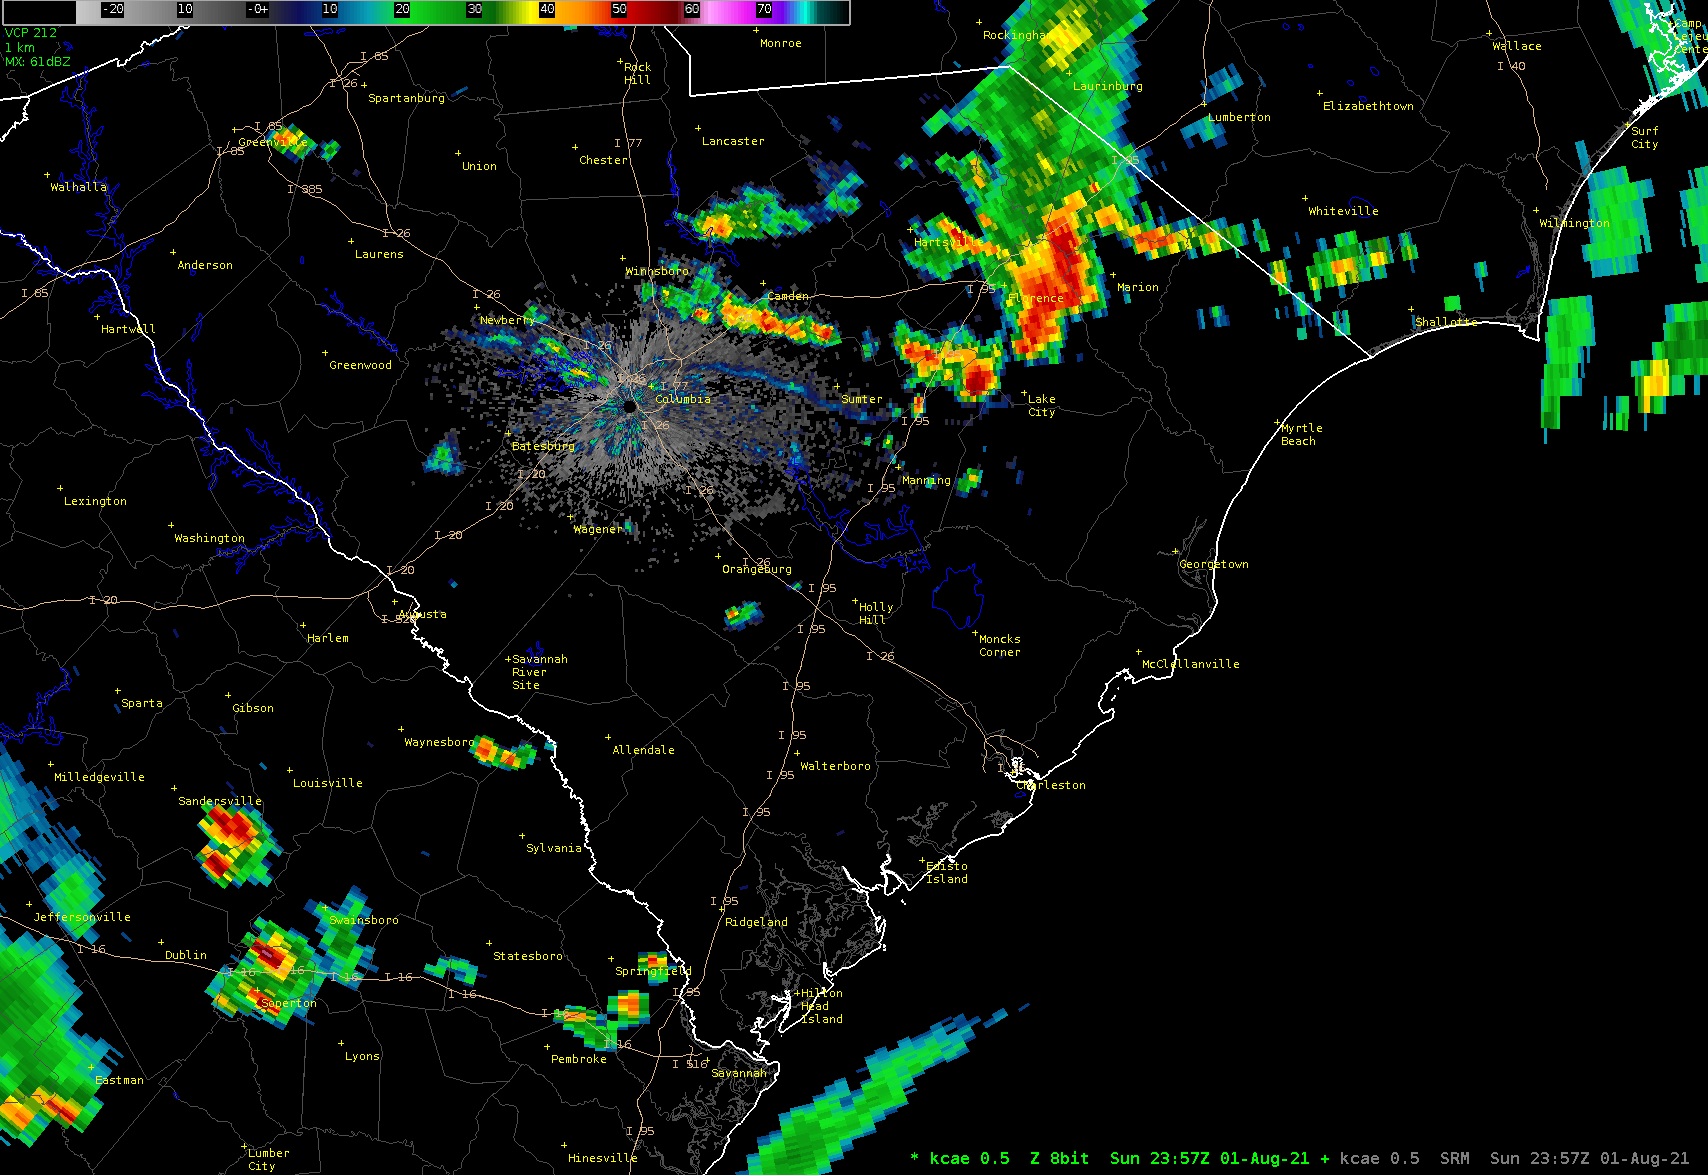 Radar loop depicting a southward-moving outflow boundary initiating additional thunderstorms across the Midlands of South Carolina.